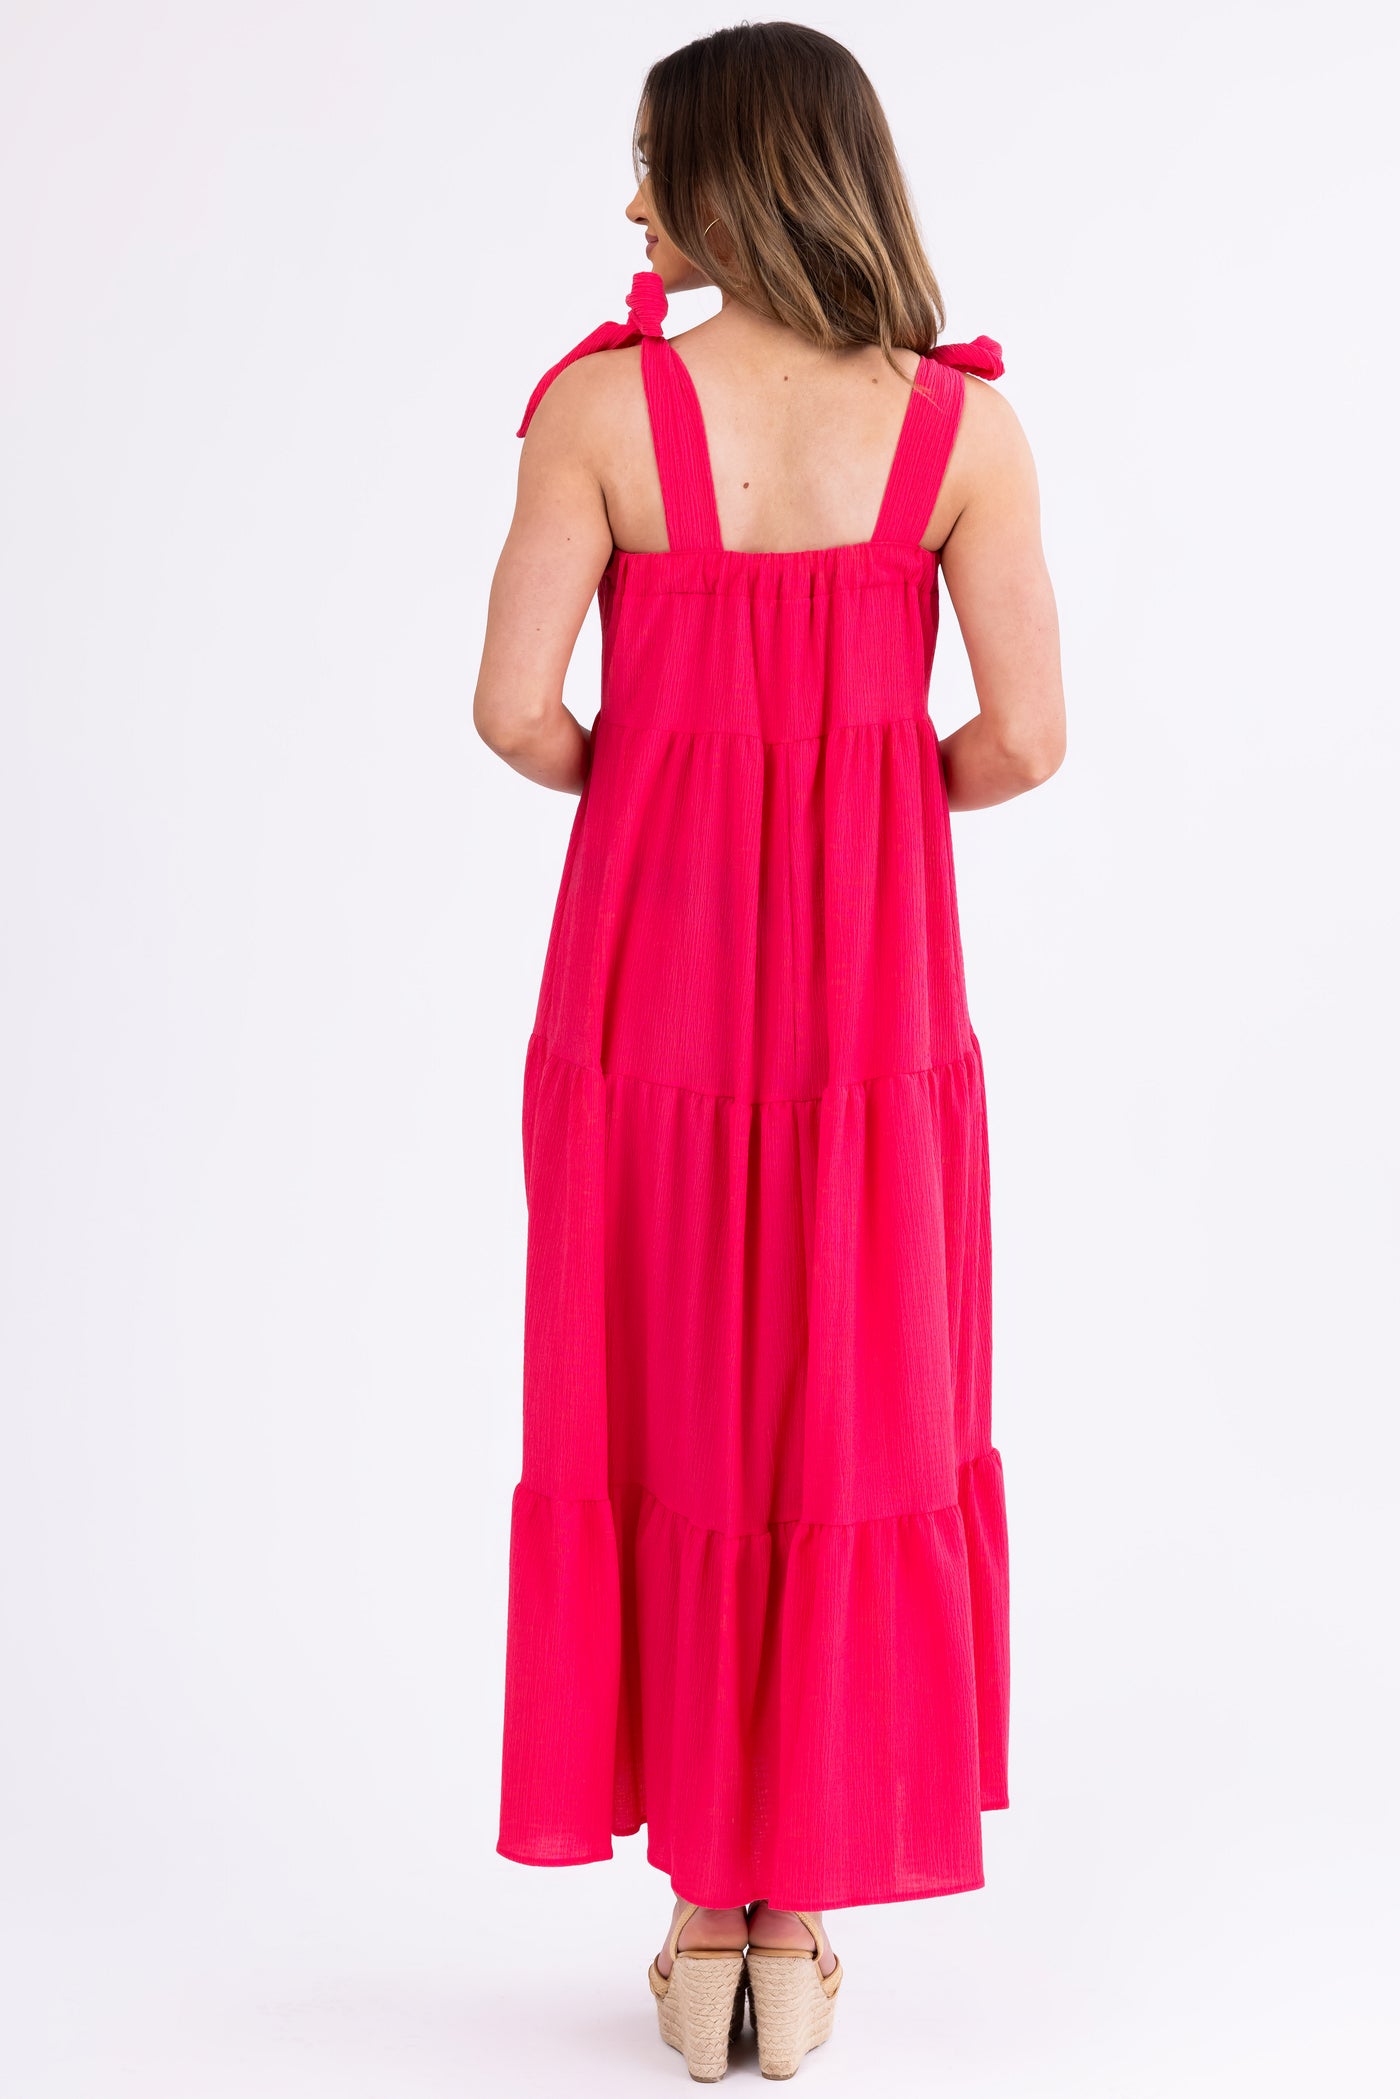 Hot Pink Adjustable Tie Strap Tiered Maxi Dress | Lime Lush